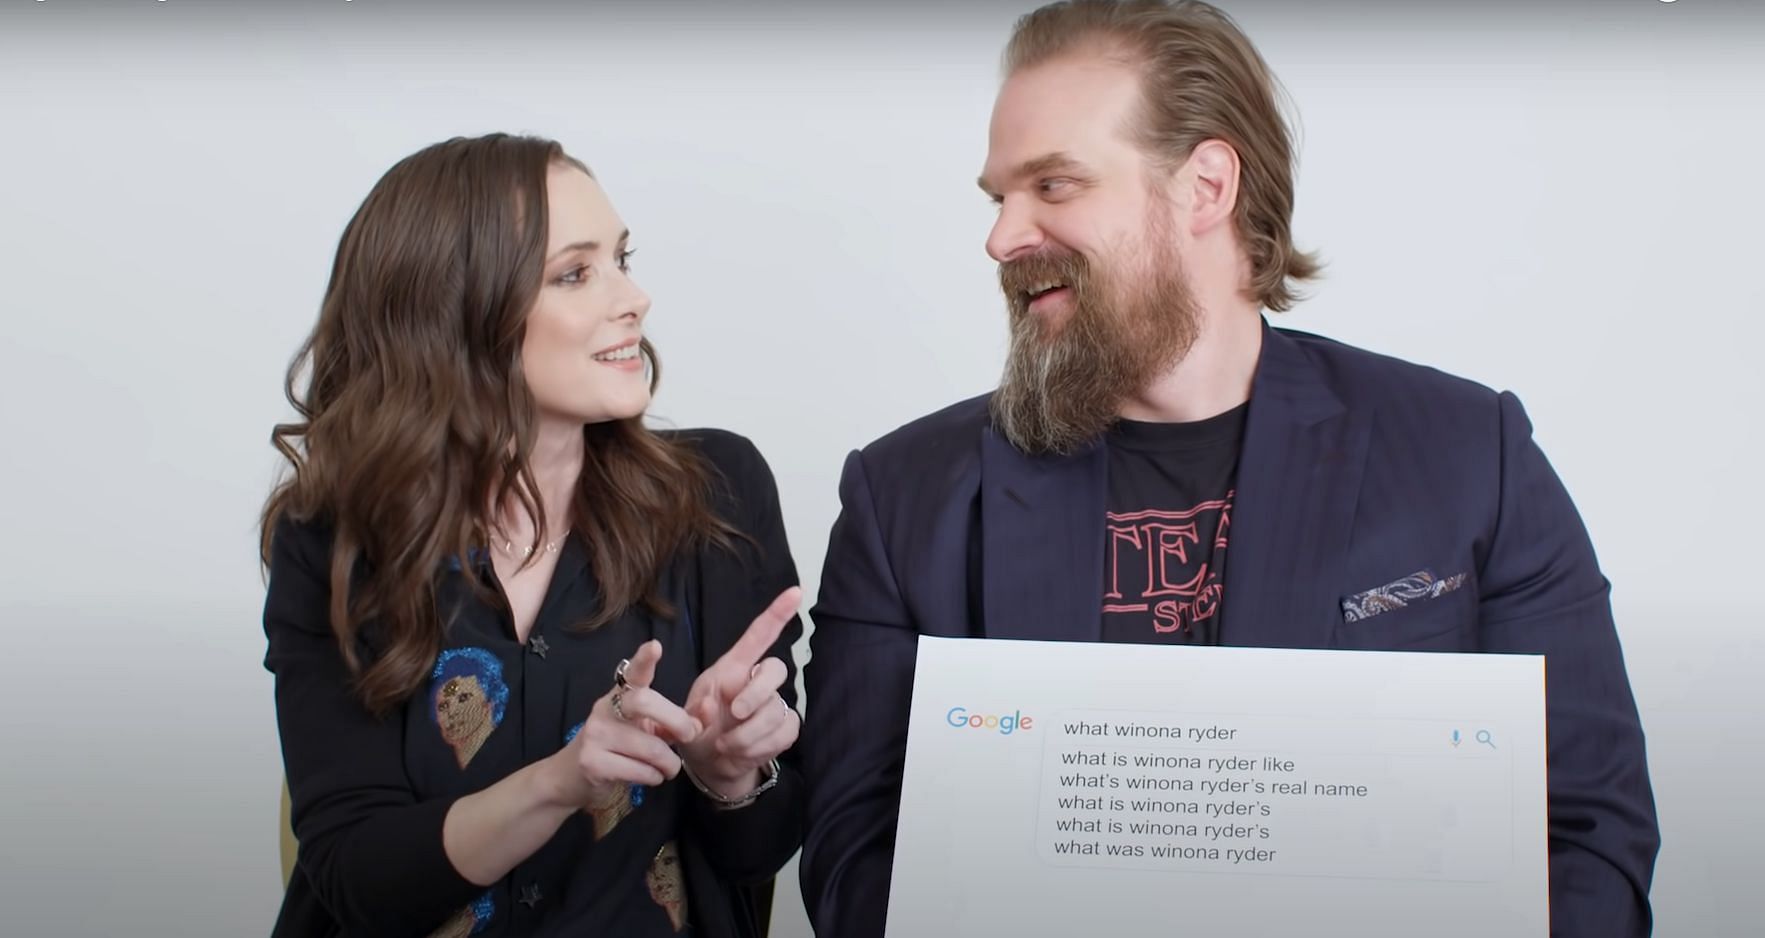 Winona Ryder with her Stranger Things co-star David Harbour on Wired Autocomplete interview (Image via Wired/YouTube)